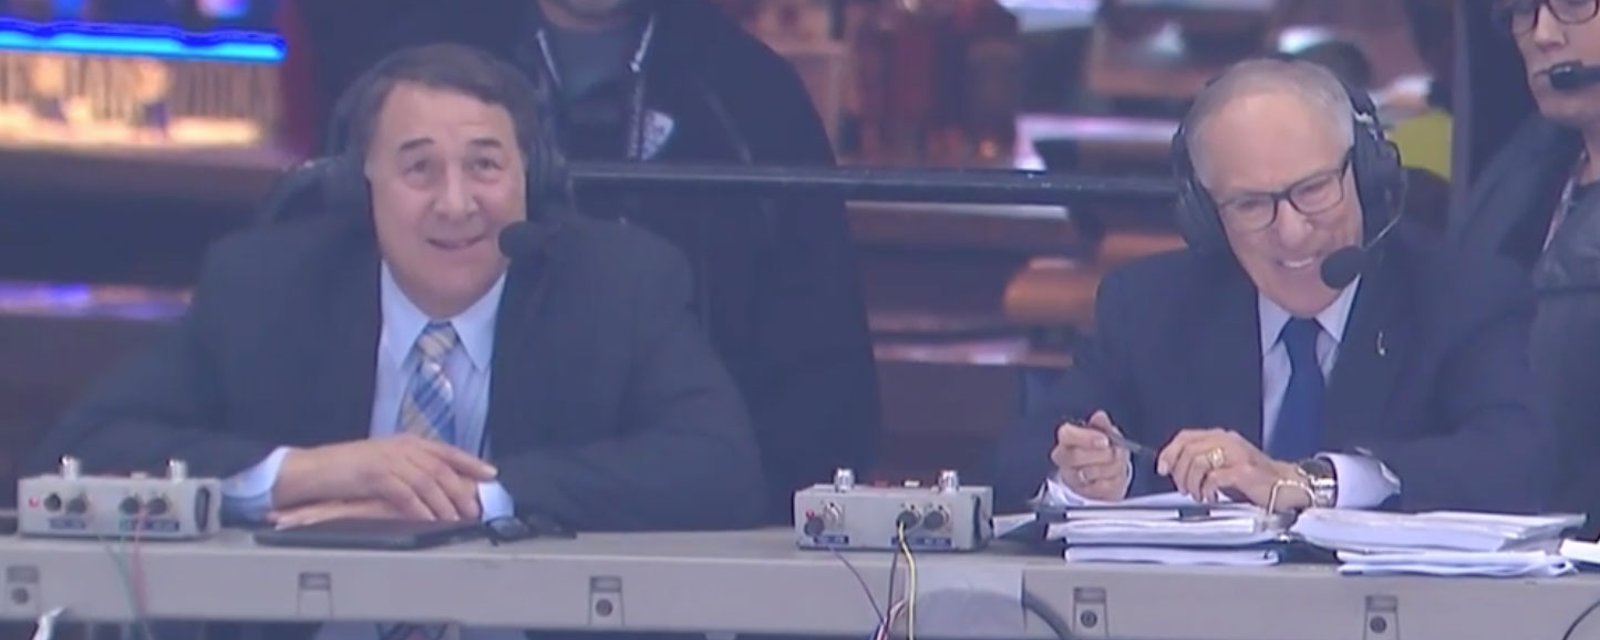 Mike Milbury has another embarrassing moment on live TV…